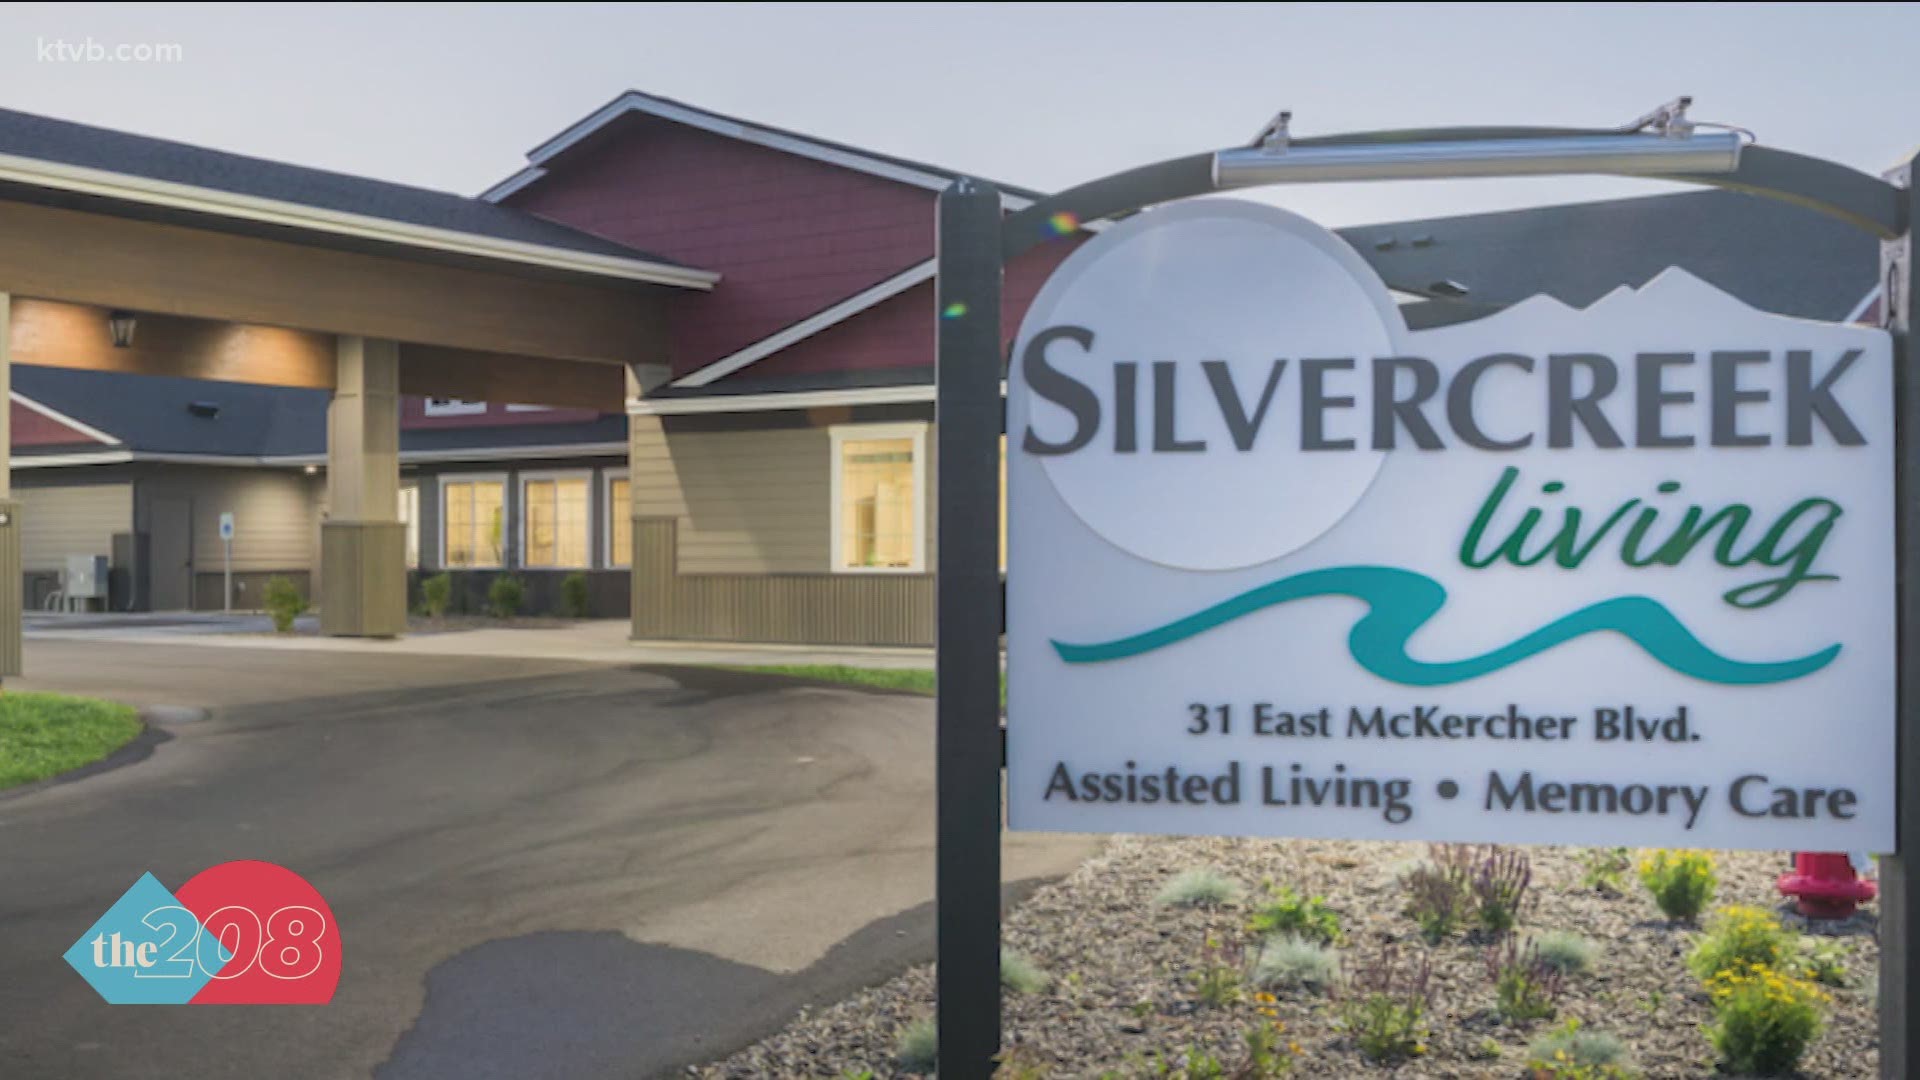 All but two of the 27 residents of Silvercreek Living did get their first dose on New Year's Eve. But only 14, about half of the staff, did not.